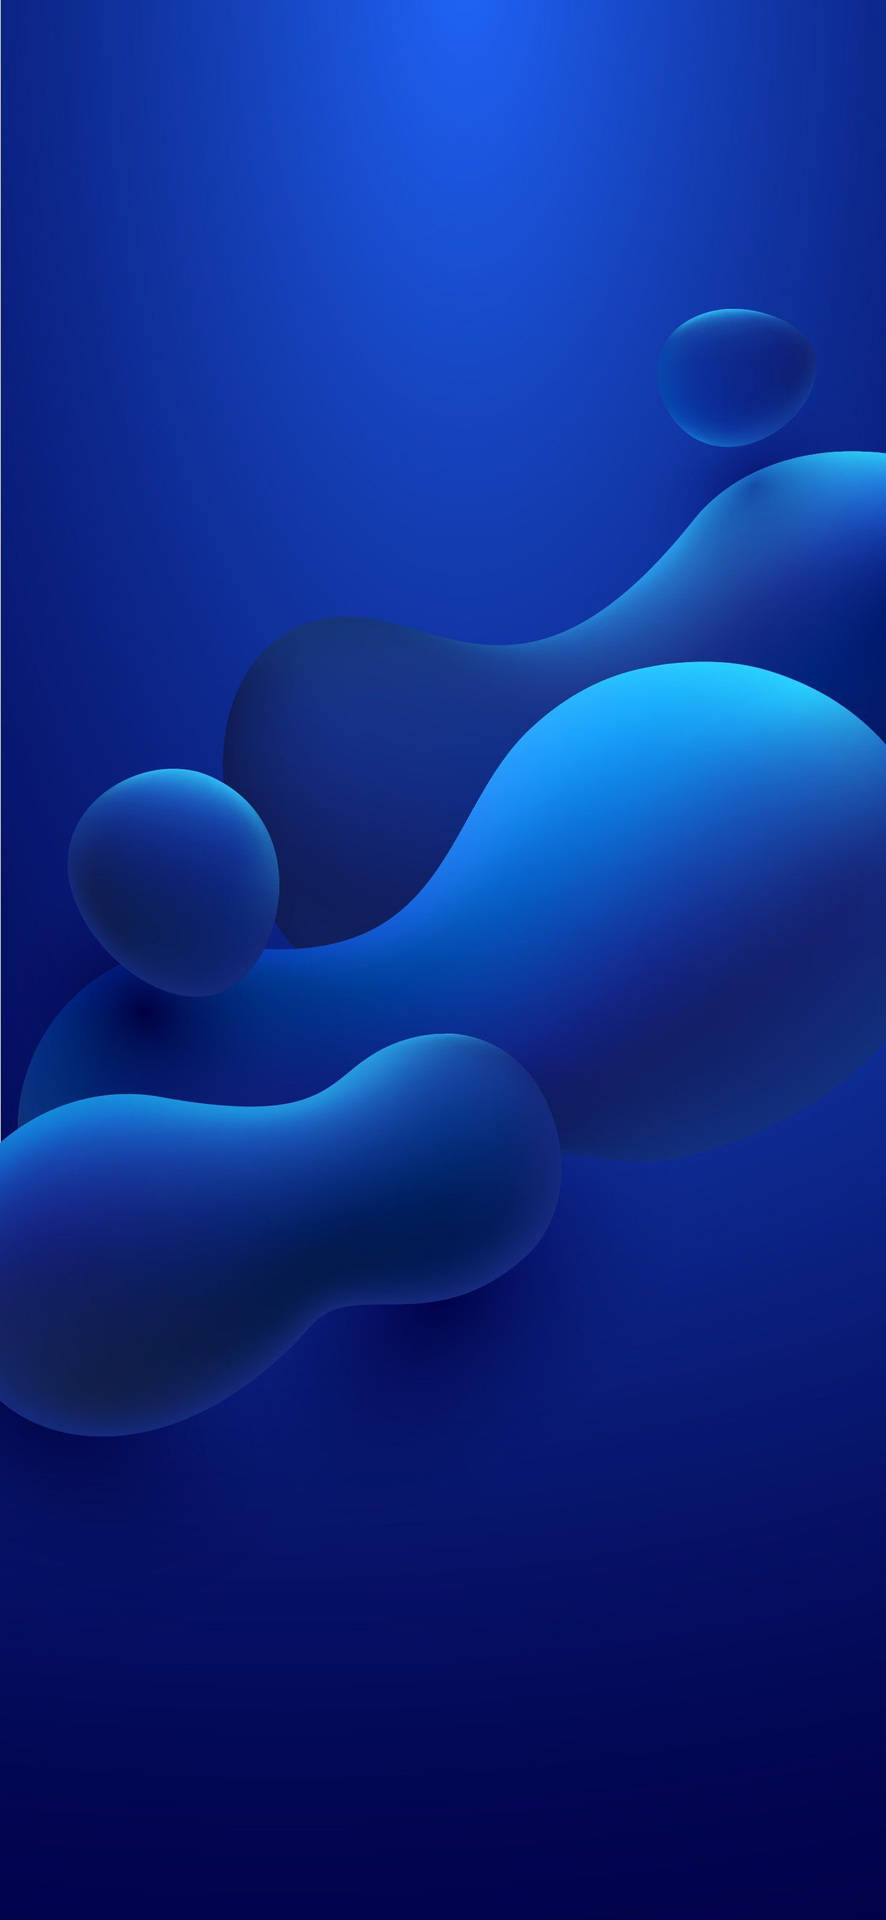 Best Blue Aesthetic Wallpapers for iPhone and Android [4K Resolution]